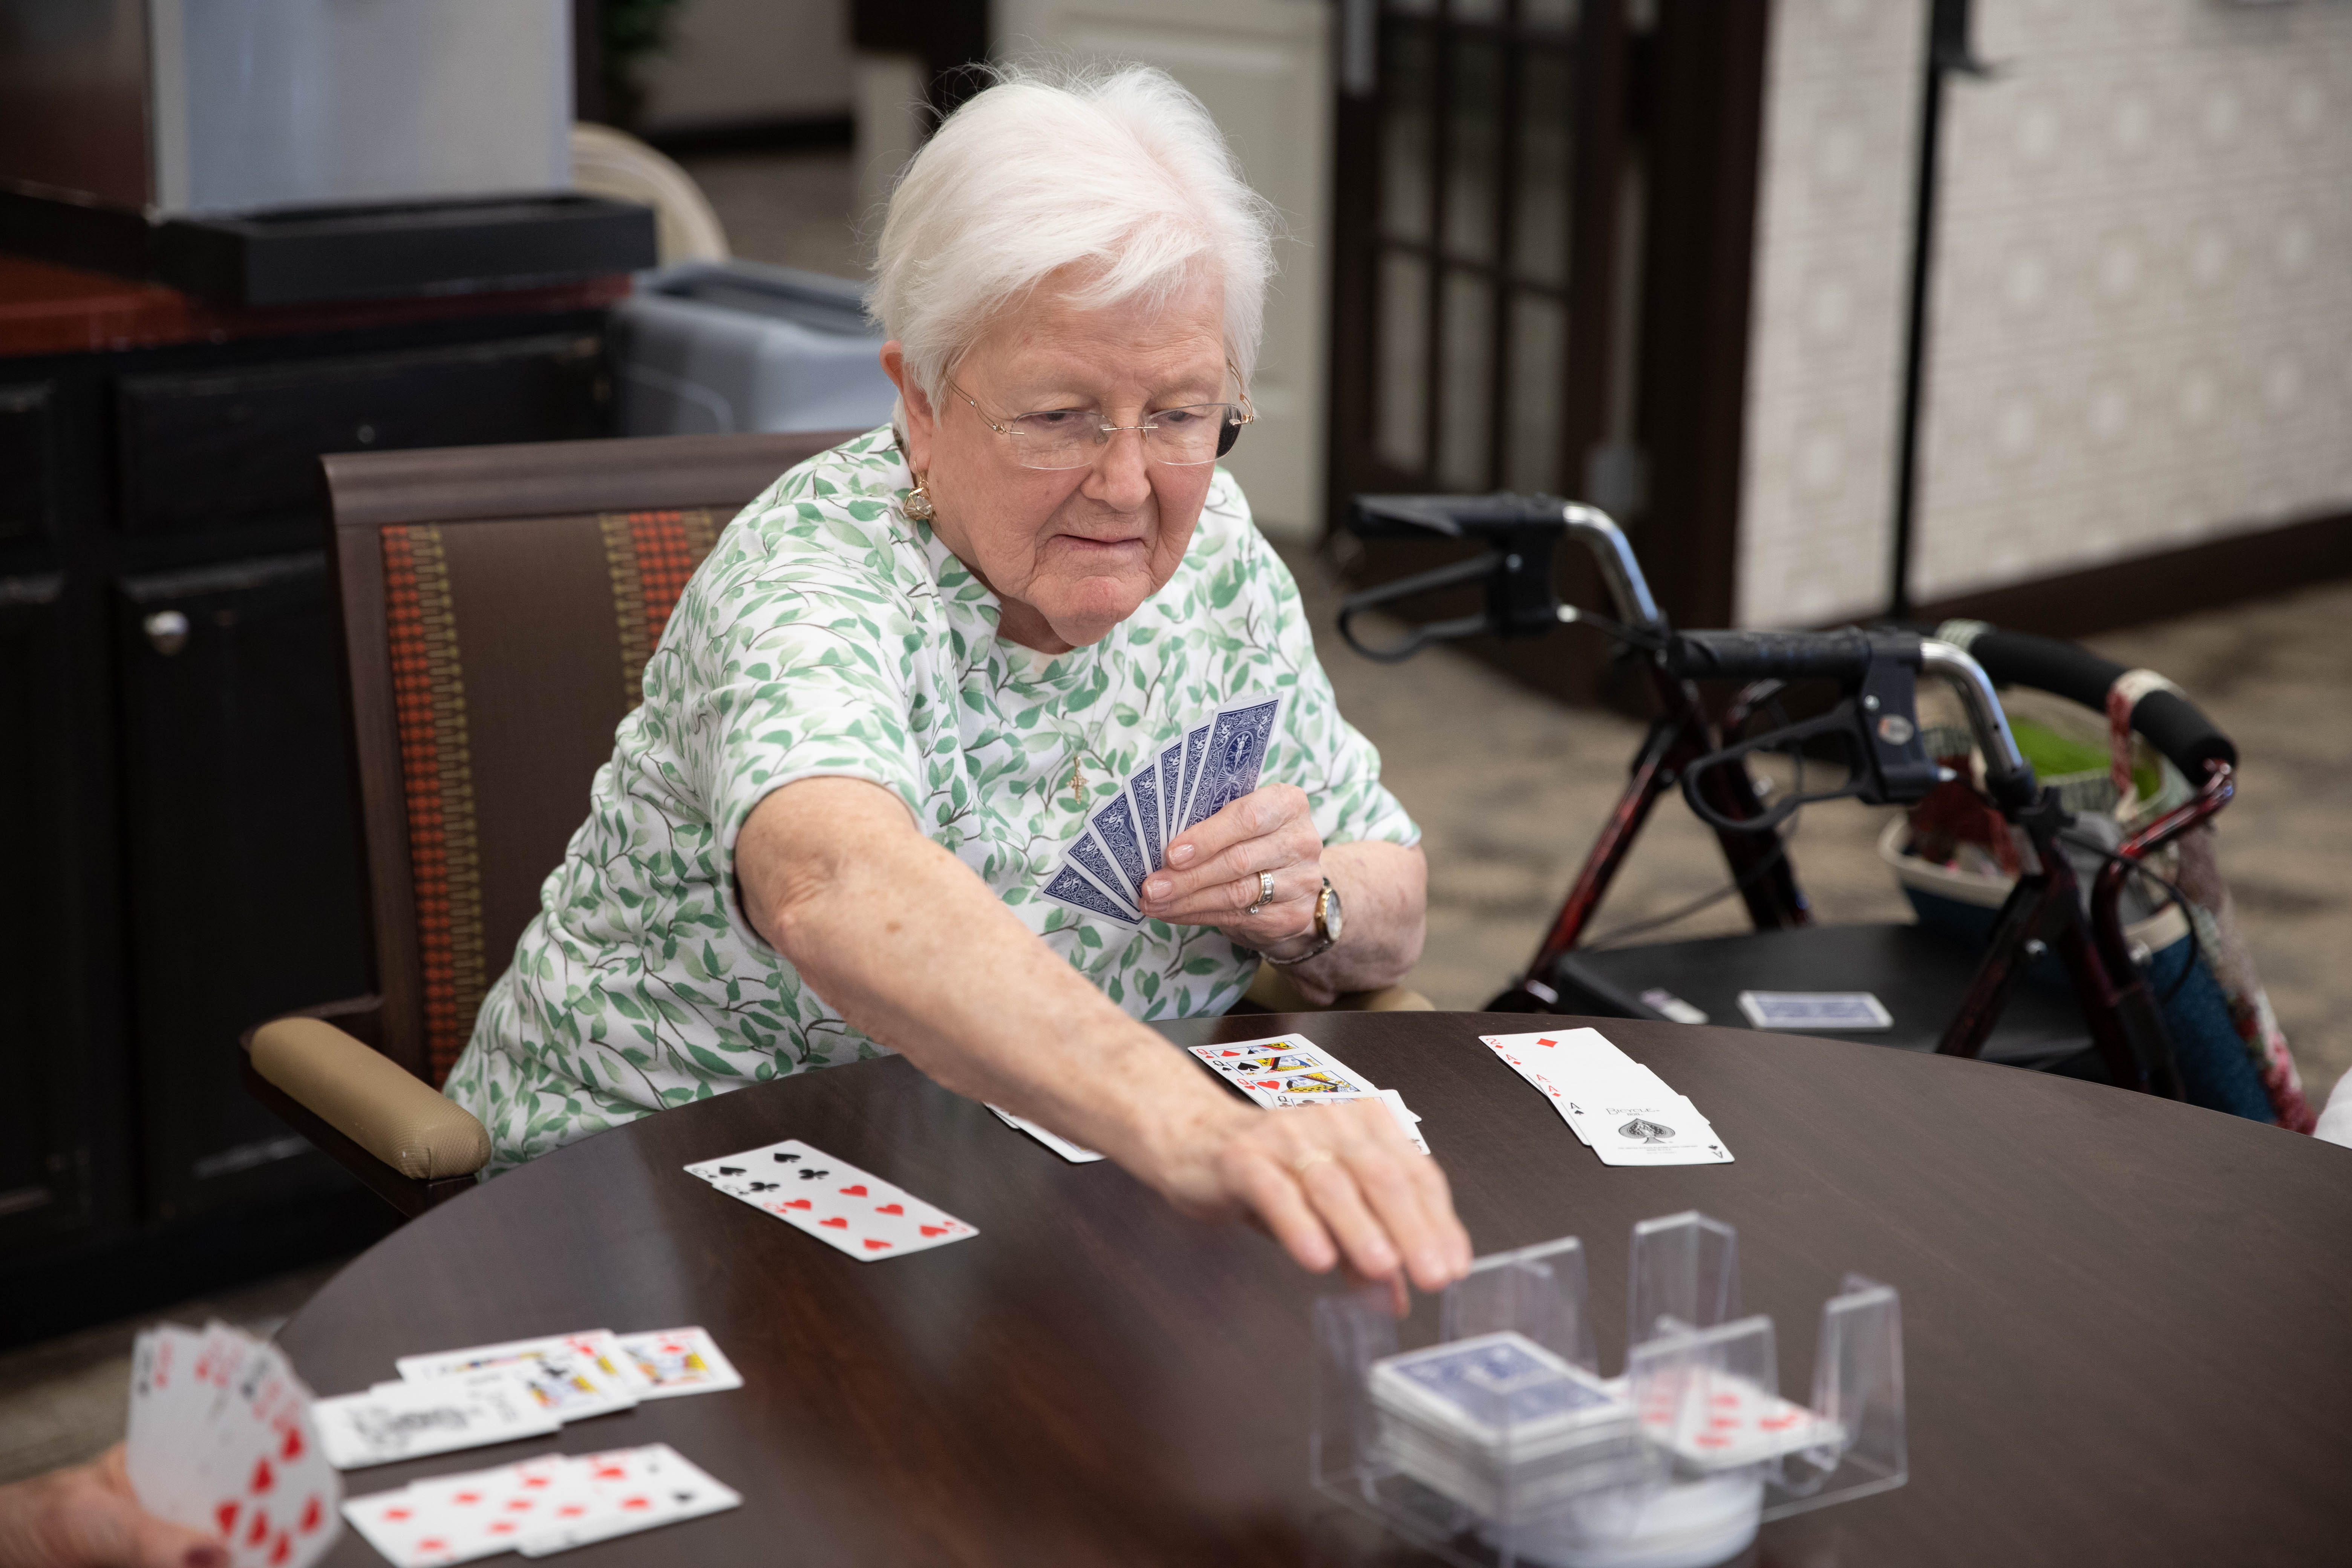 <span  class="uc_style_uc_tiles_grid_image_elementor_uc_items_attribute_title" style="color:#000000;">A resident is playing cards at a table. </span>